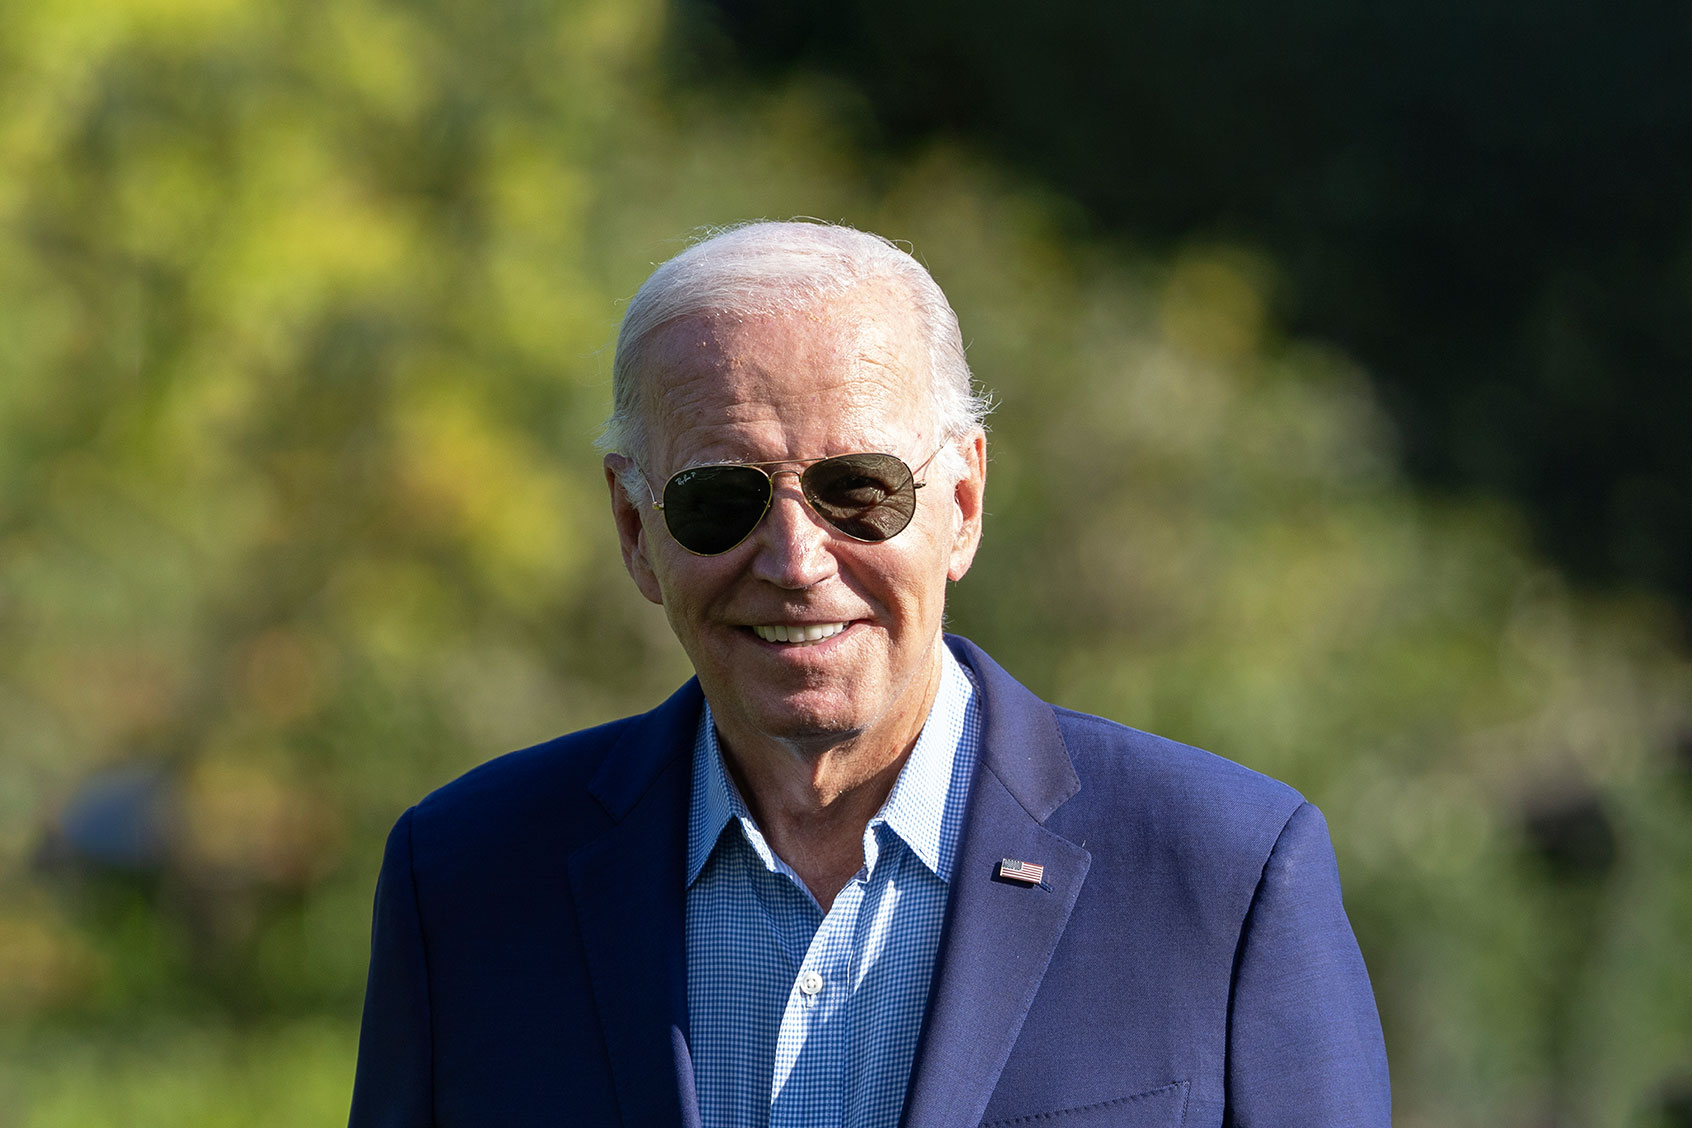 Just lean in, Joe: Biden needs to embrace his old age